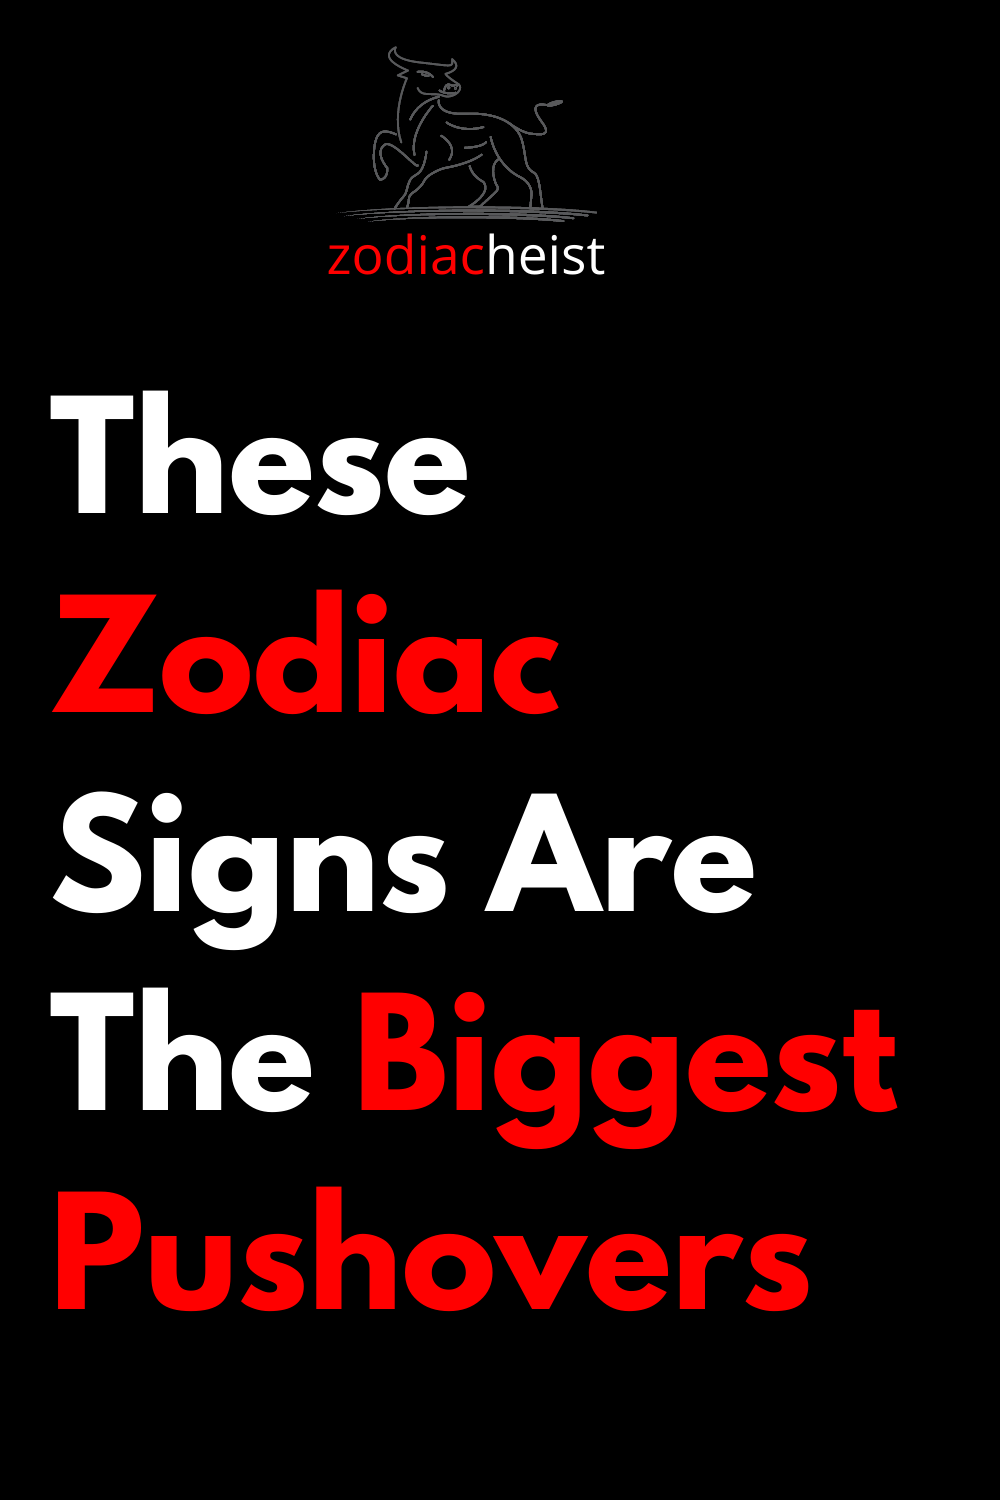 These Zodiac Signs Are The Biggest Pushovers